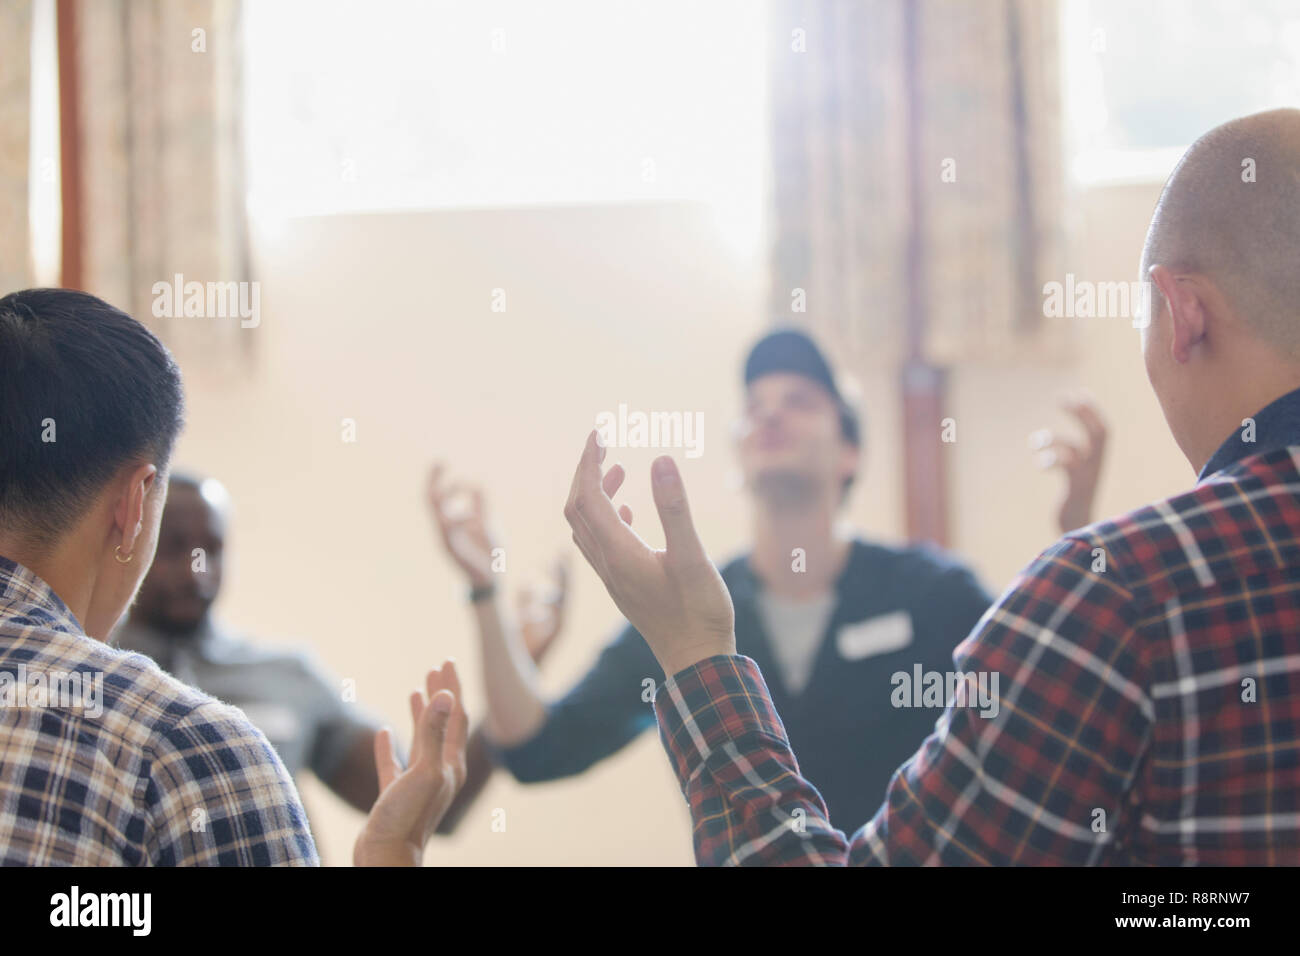 Men with arms raised praying in prayer group in community center Stock Photo